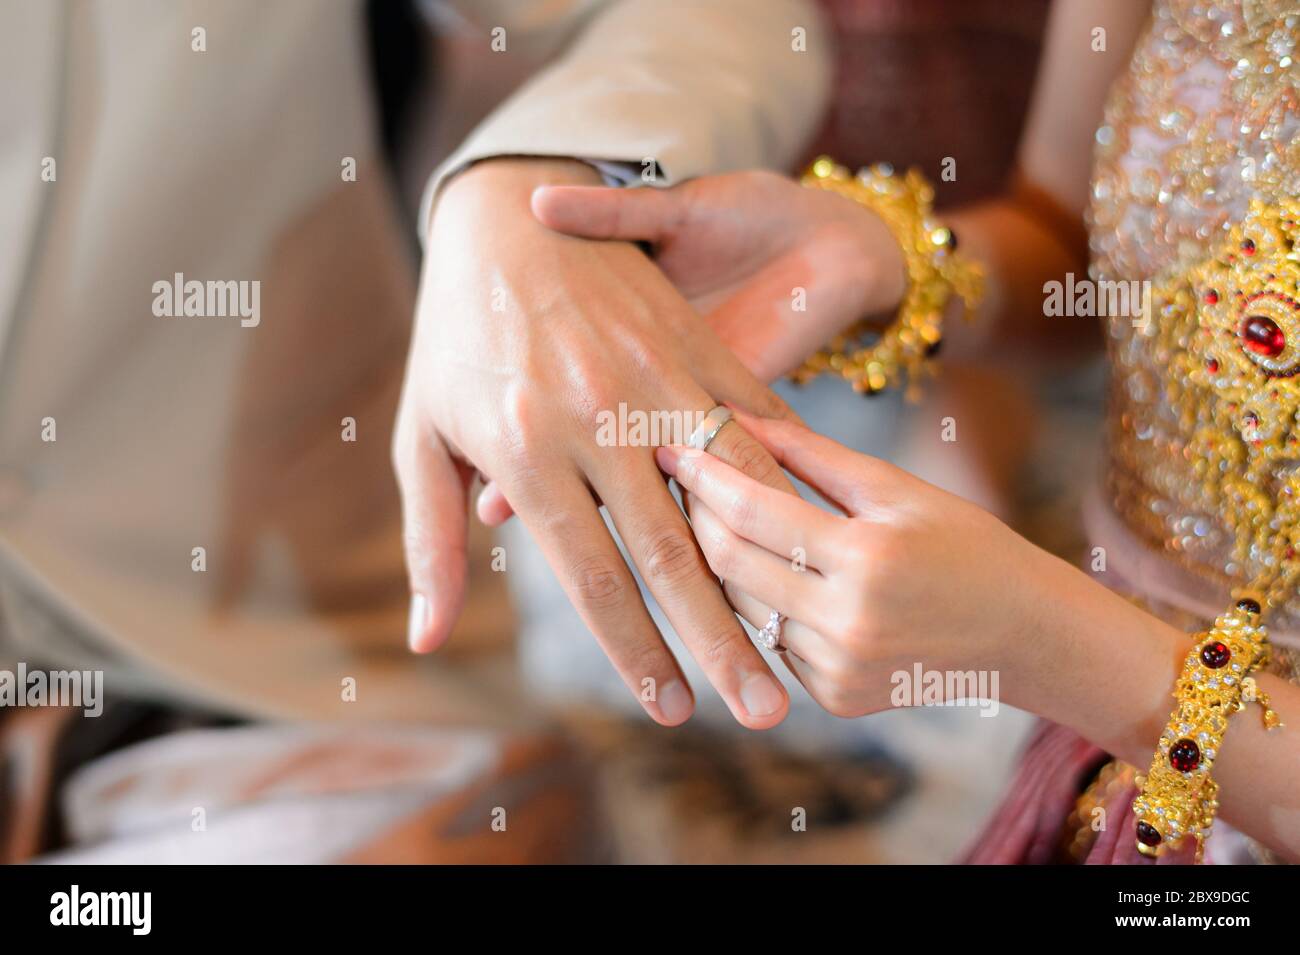 Bride and Groom putting wedding ring on finger, Thai wedding engagement ceremony Stock Photo